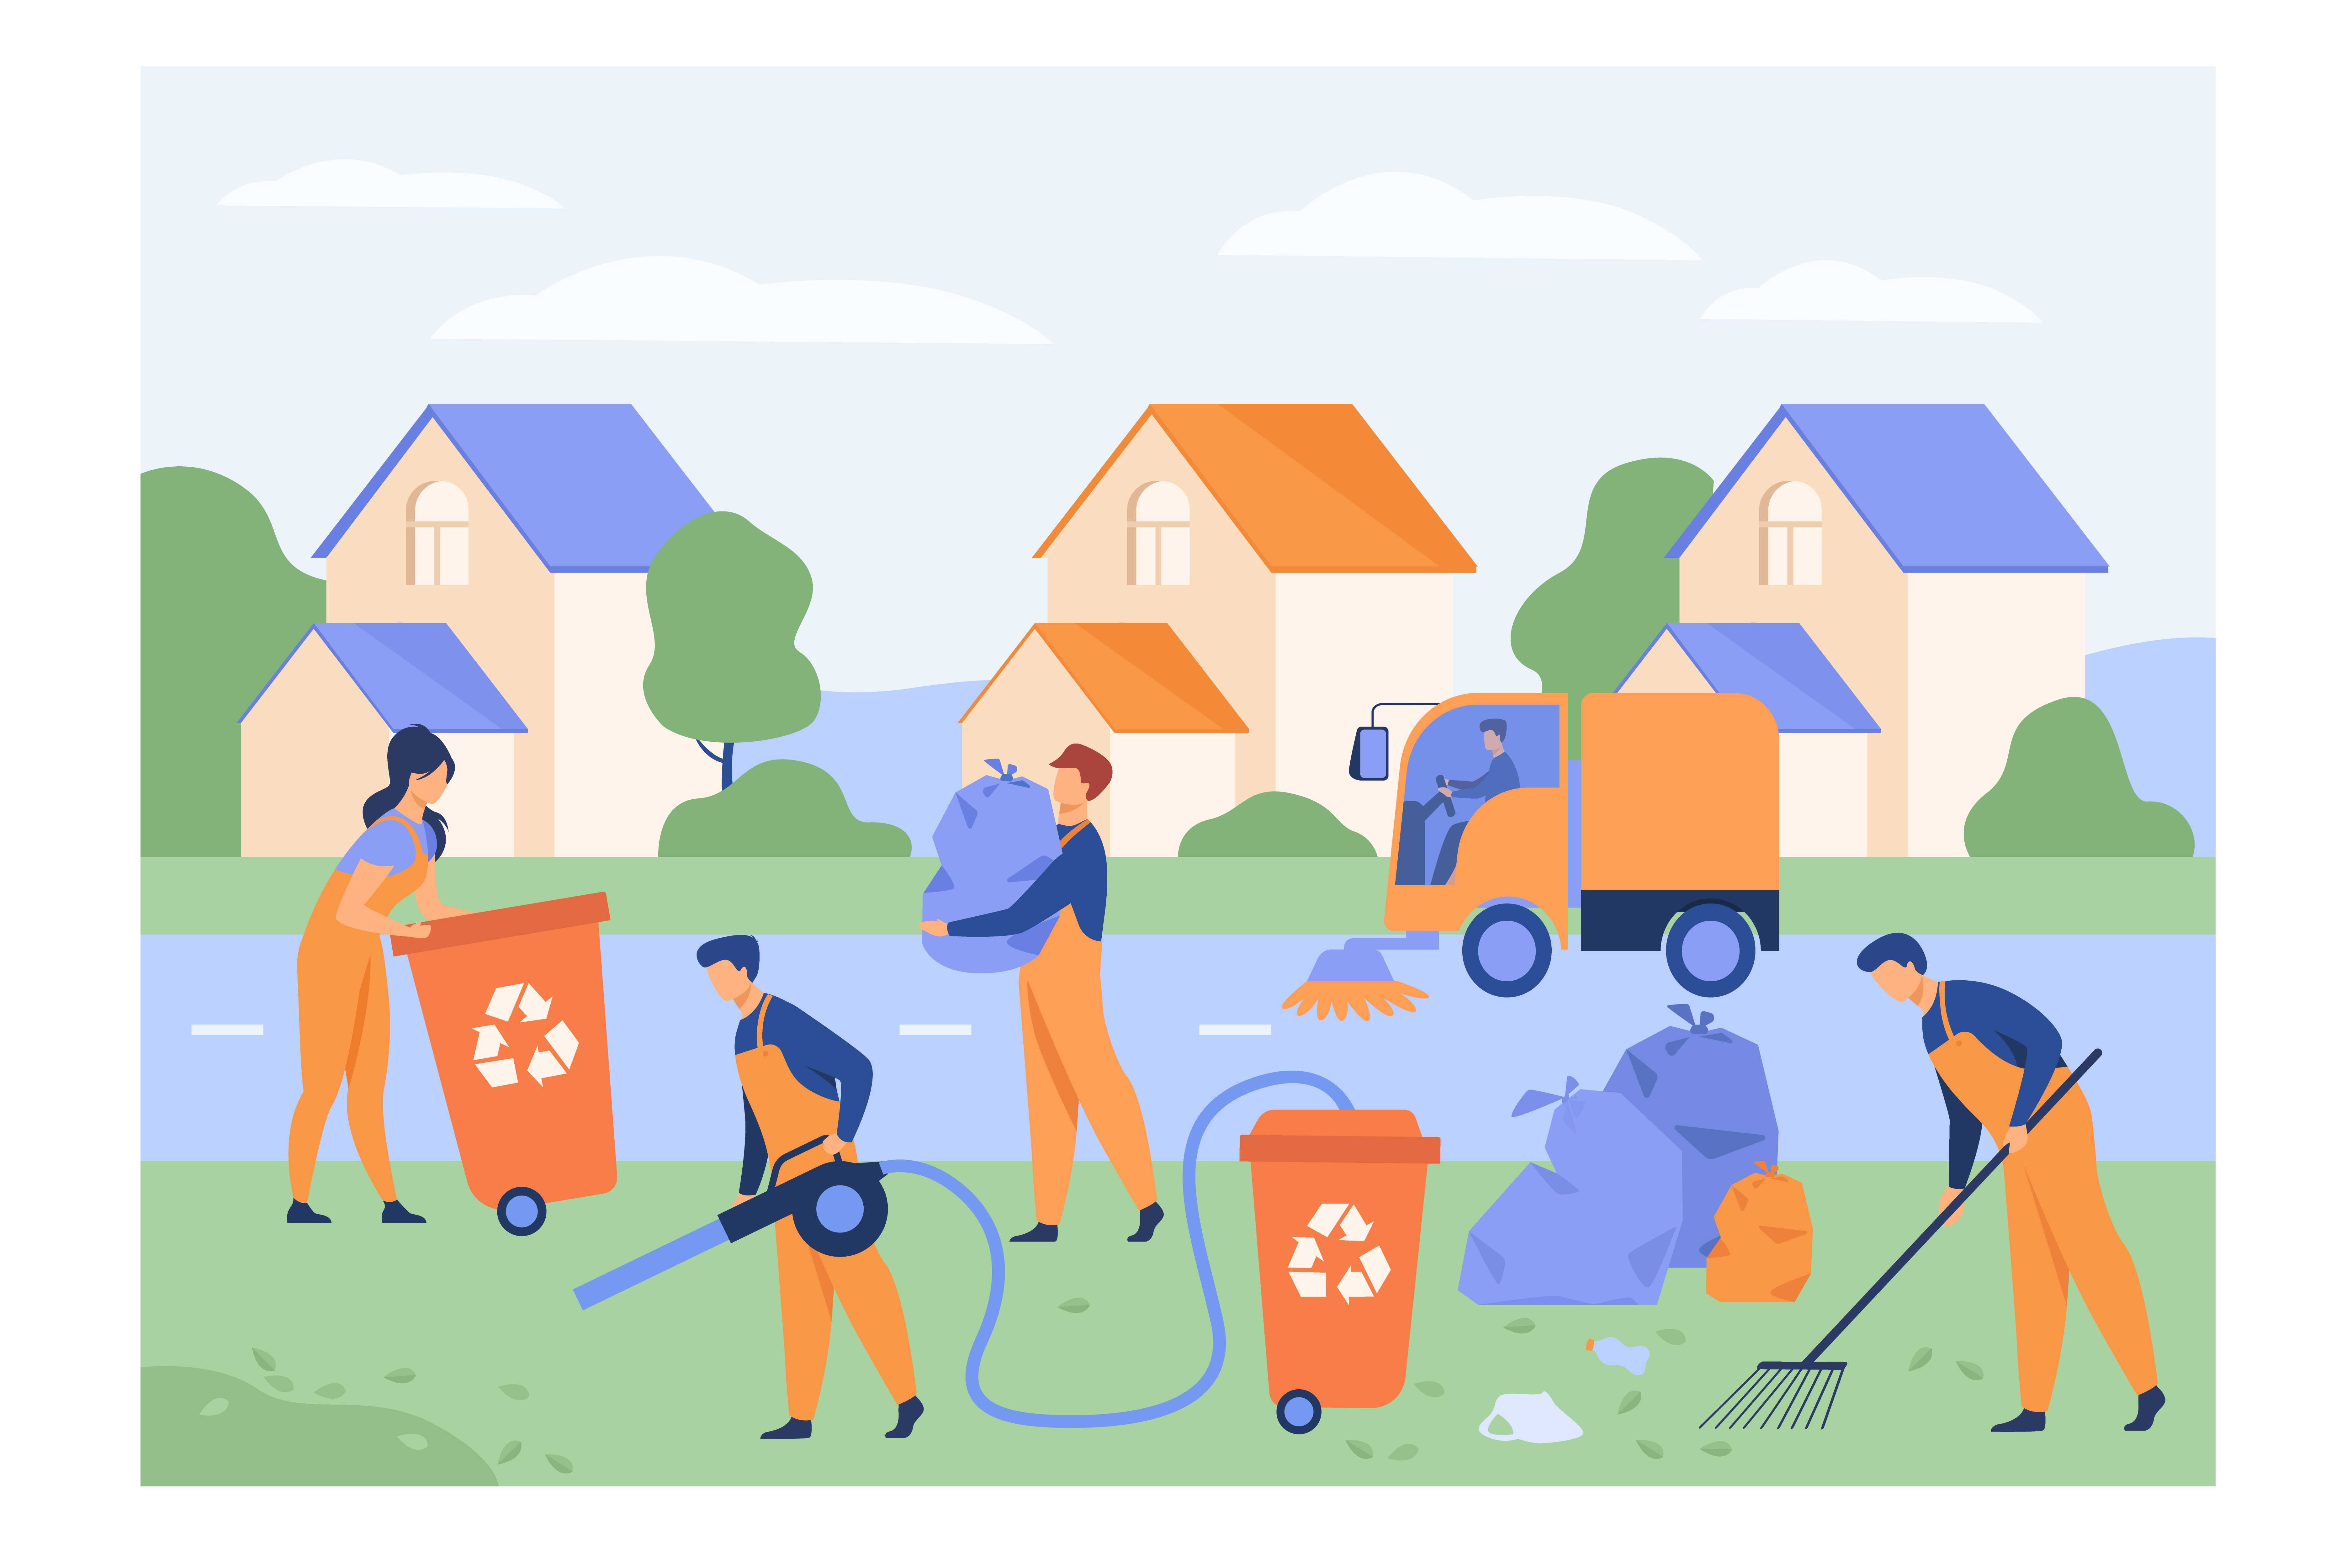 Cleaning_workers_picking_up_litter_on_suburban_street.jpg